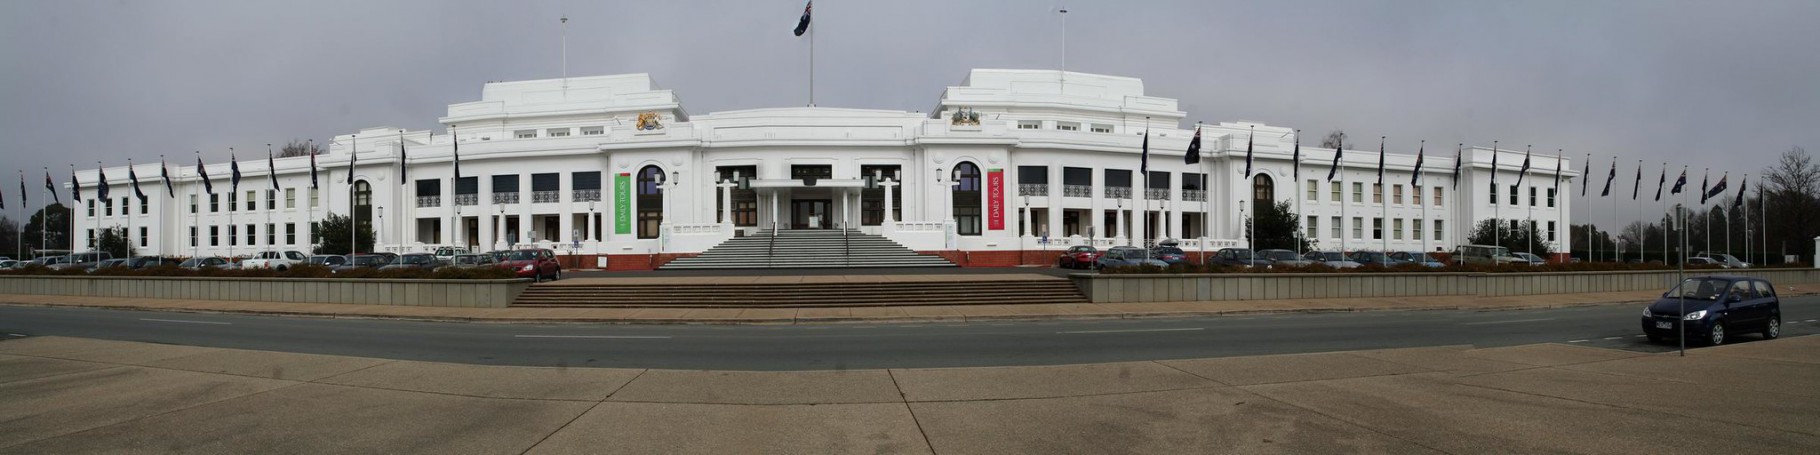 Old Parliament House Canberra